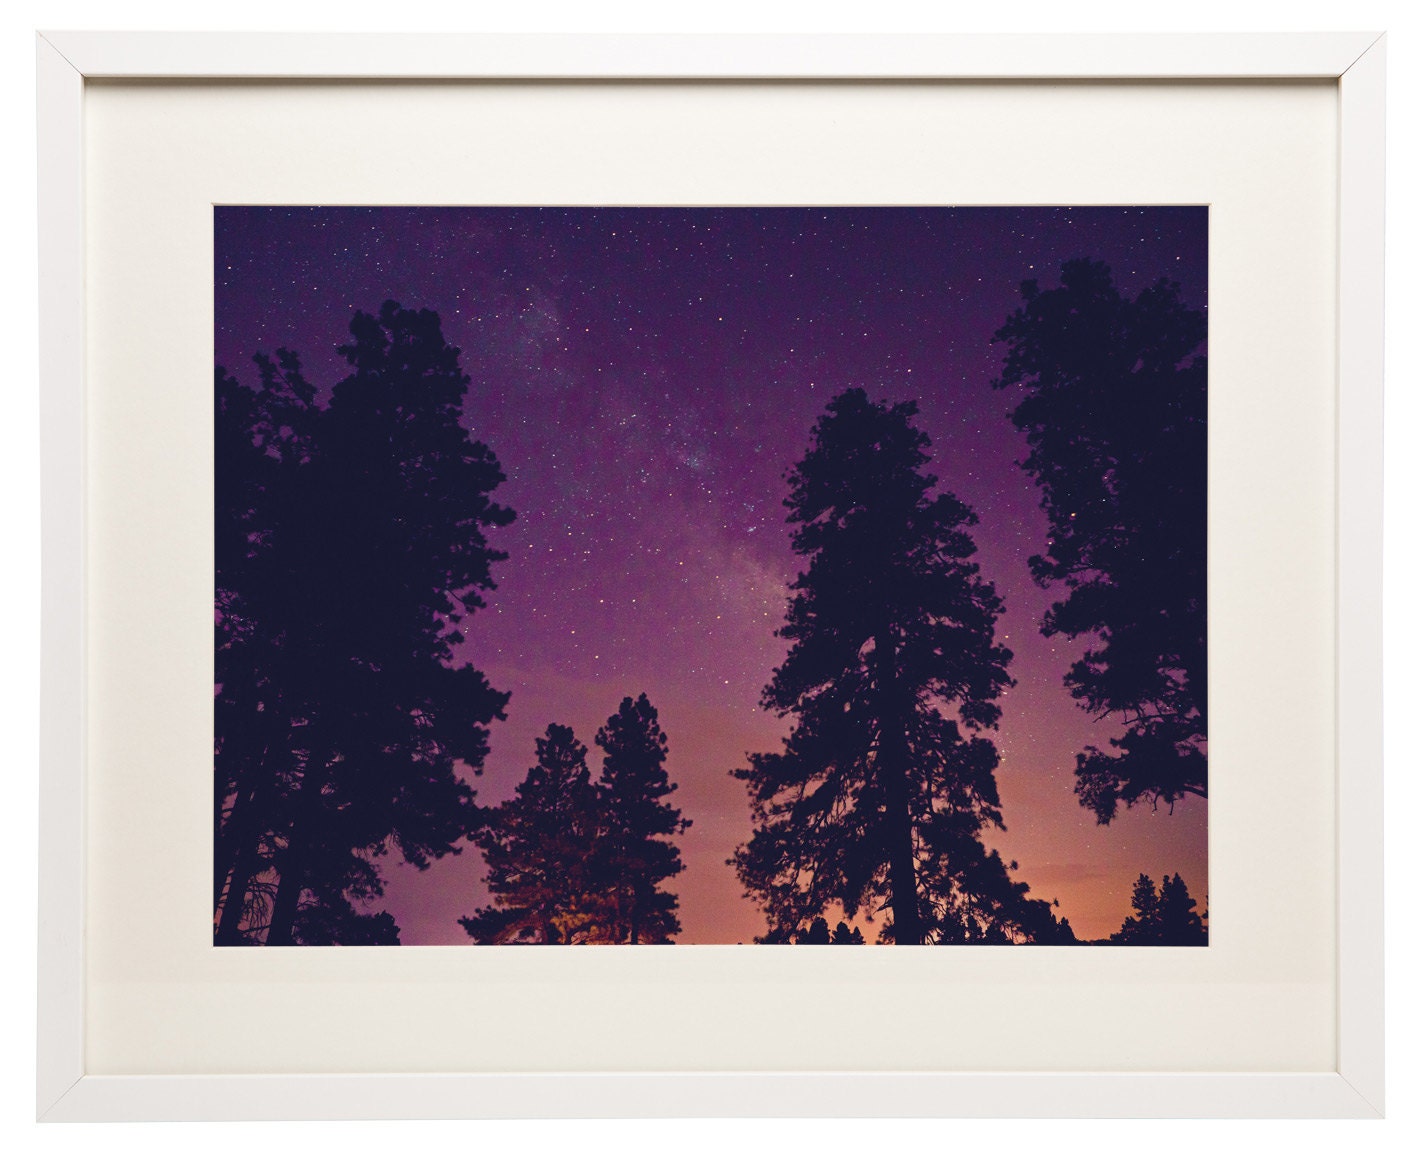 White Framed and Matted Flagstaff, AZ Color Landscape Night Time Stars Photography - f7studios